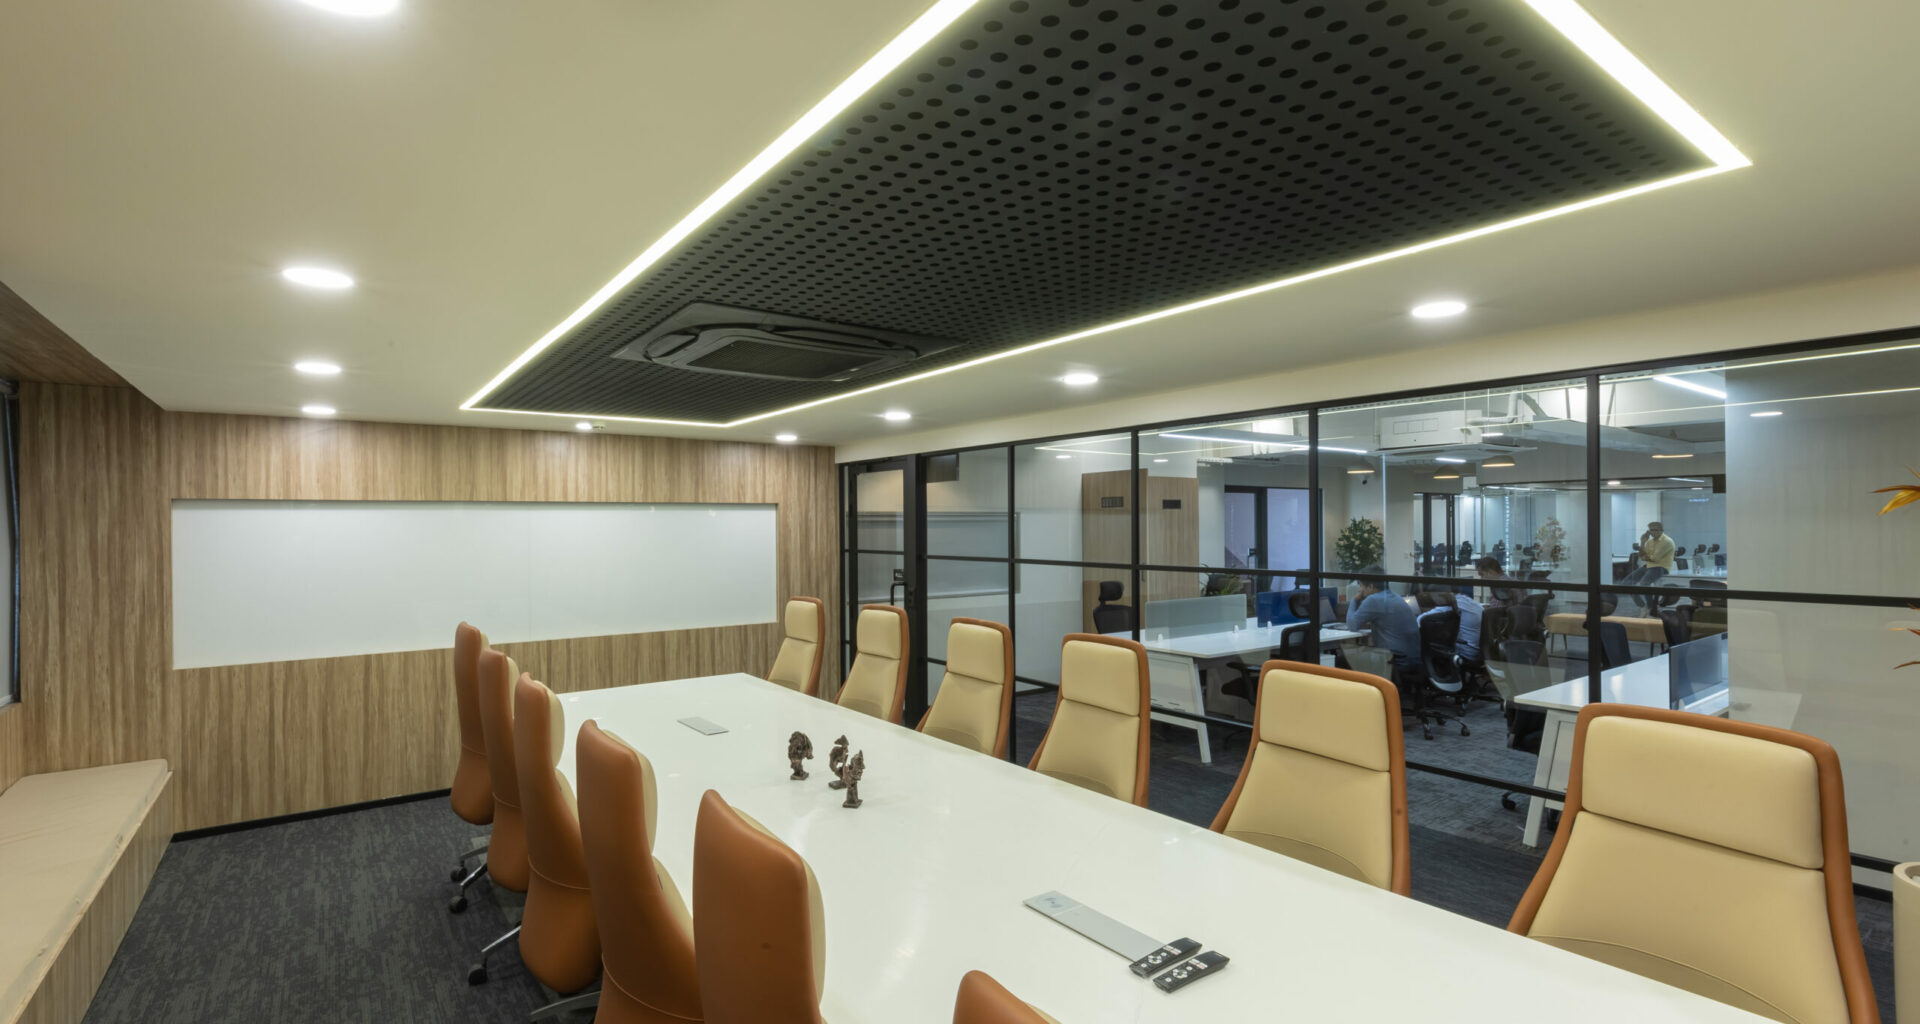 This picture, which features a beautifully created workspace, shows off the extraordinary talent of professional office interior designers in Hyderabad. With a seamless fusion of aesthetics and functions, the office emits a sense of contemporary sophistication and efficiency. The design mixes a relaxing color pattern of neutrals with accents of vivid color to promote a productive atmosphere.